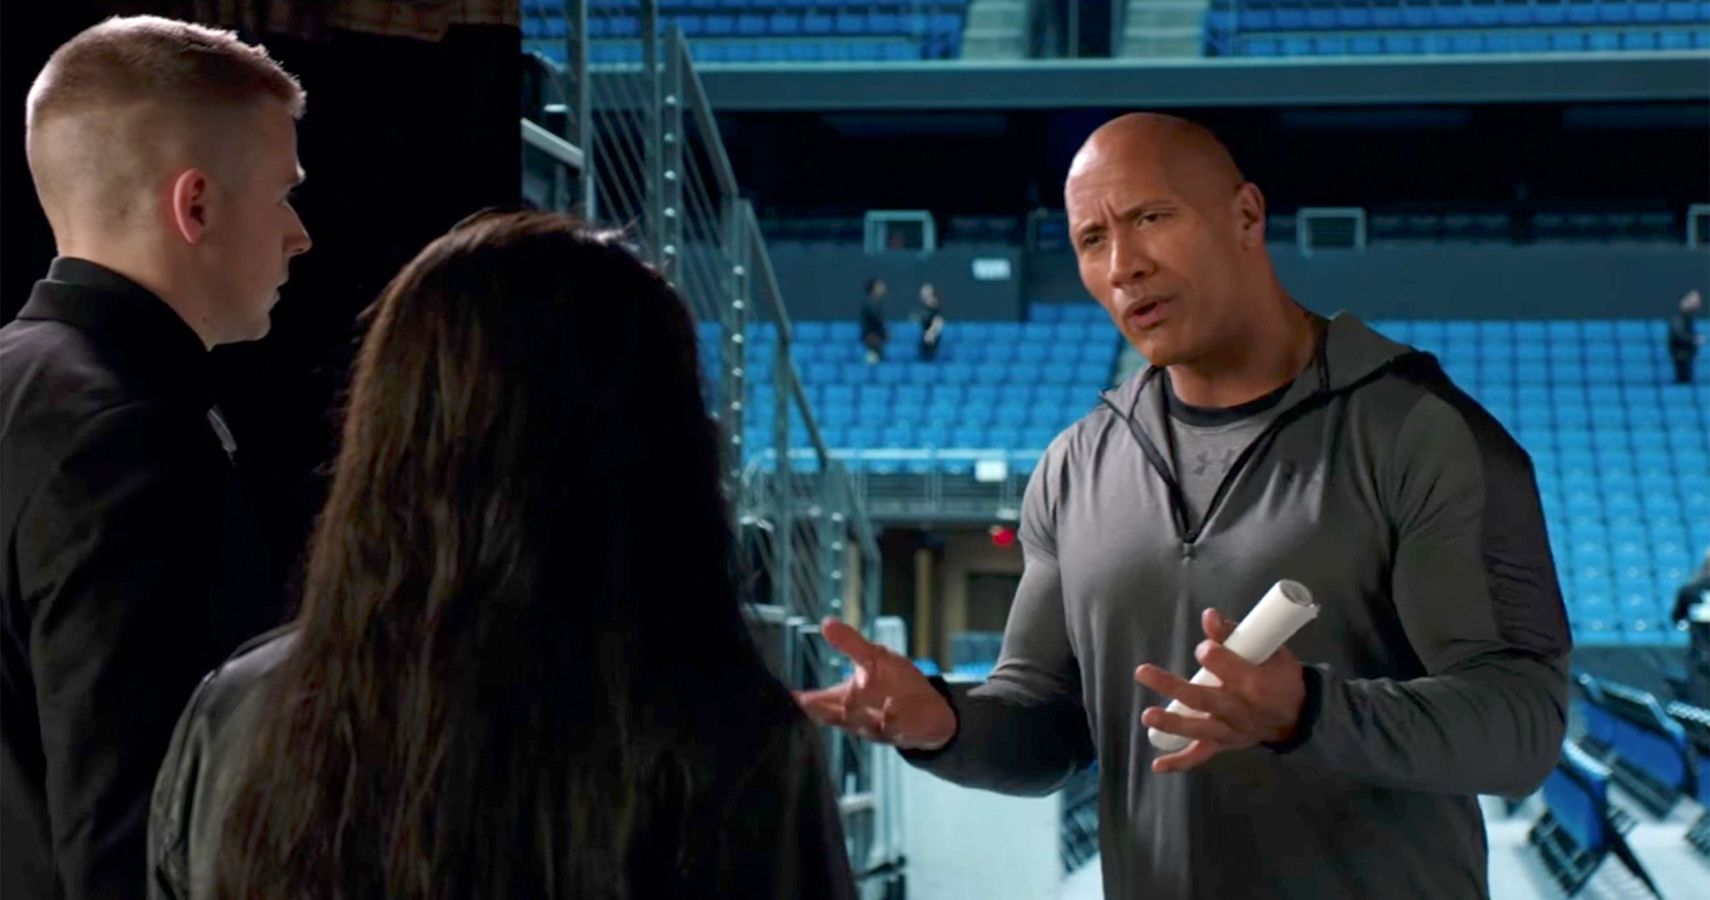 10 Of Dwayne Johnson’s Most Badass Quotes, Ranked